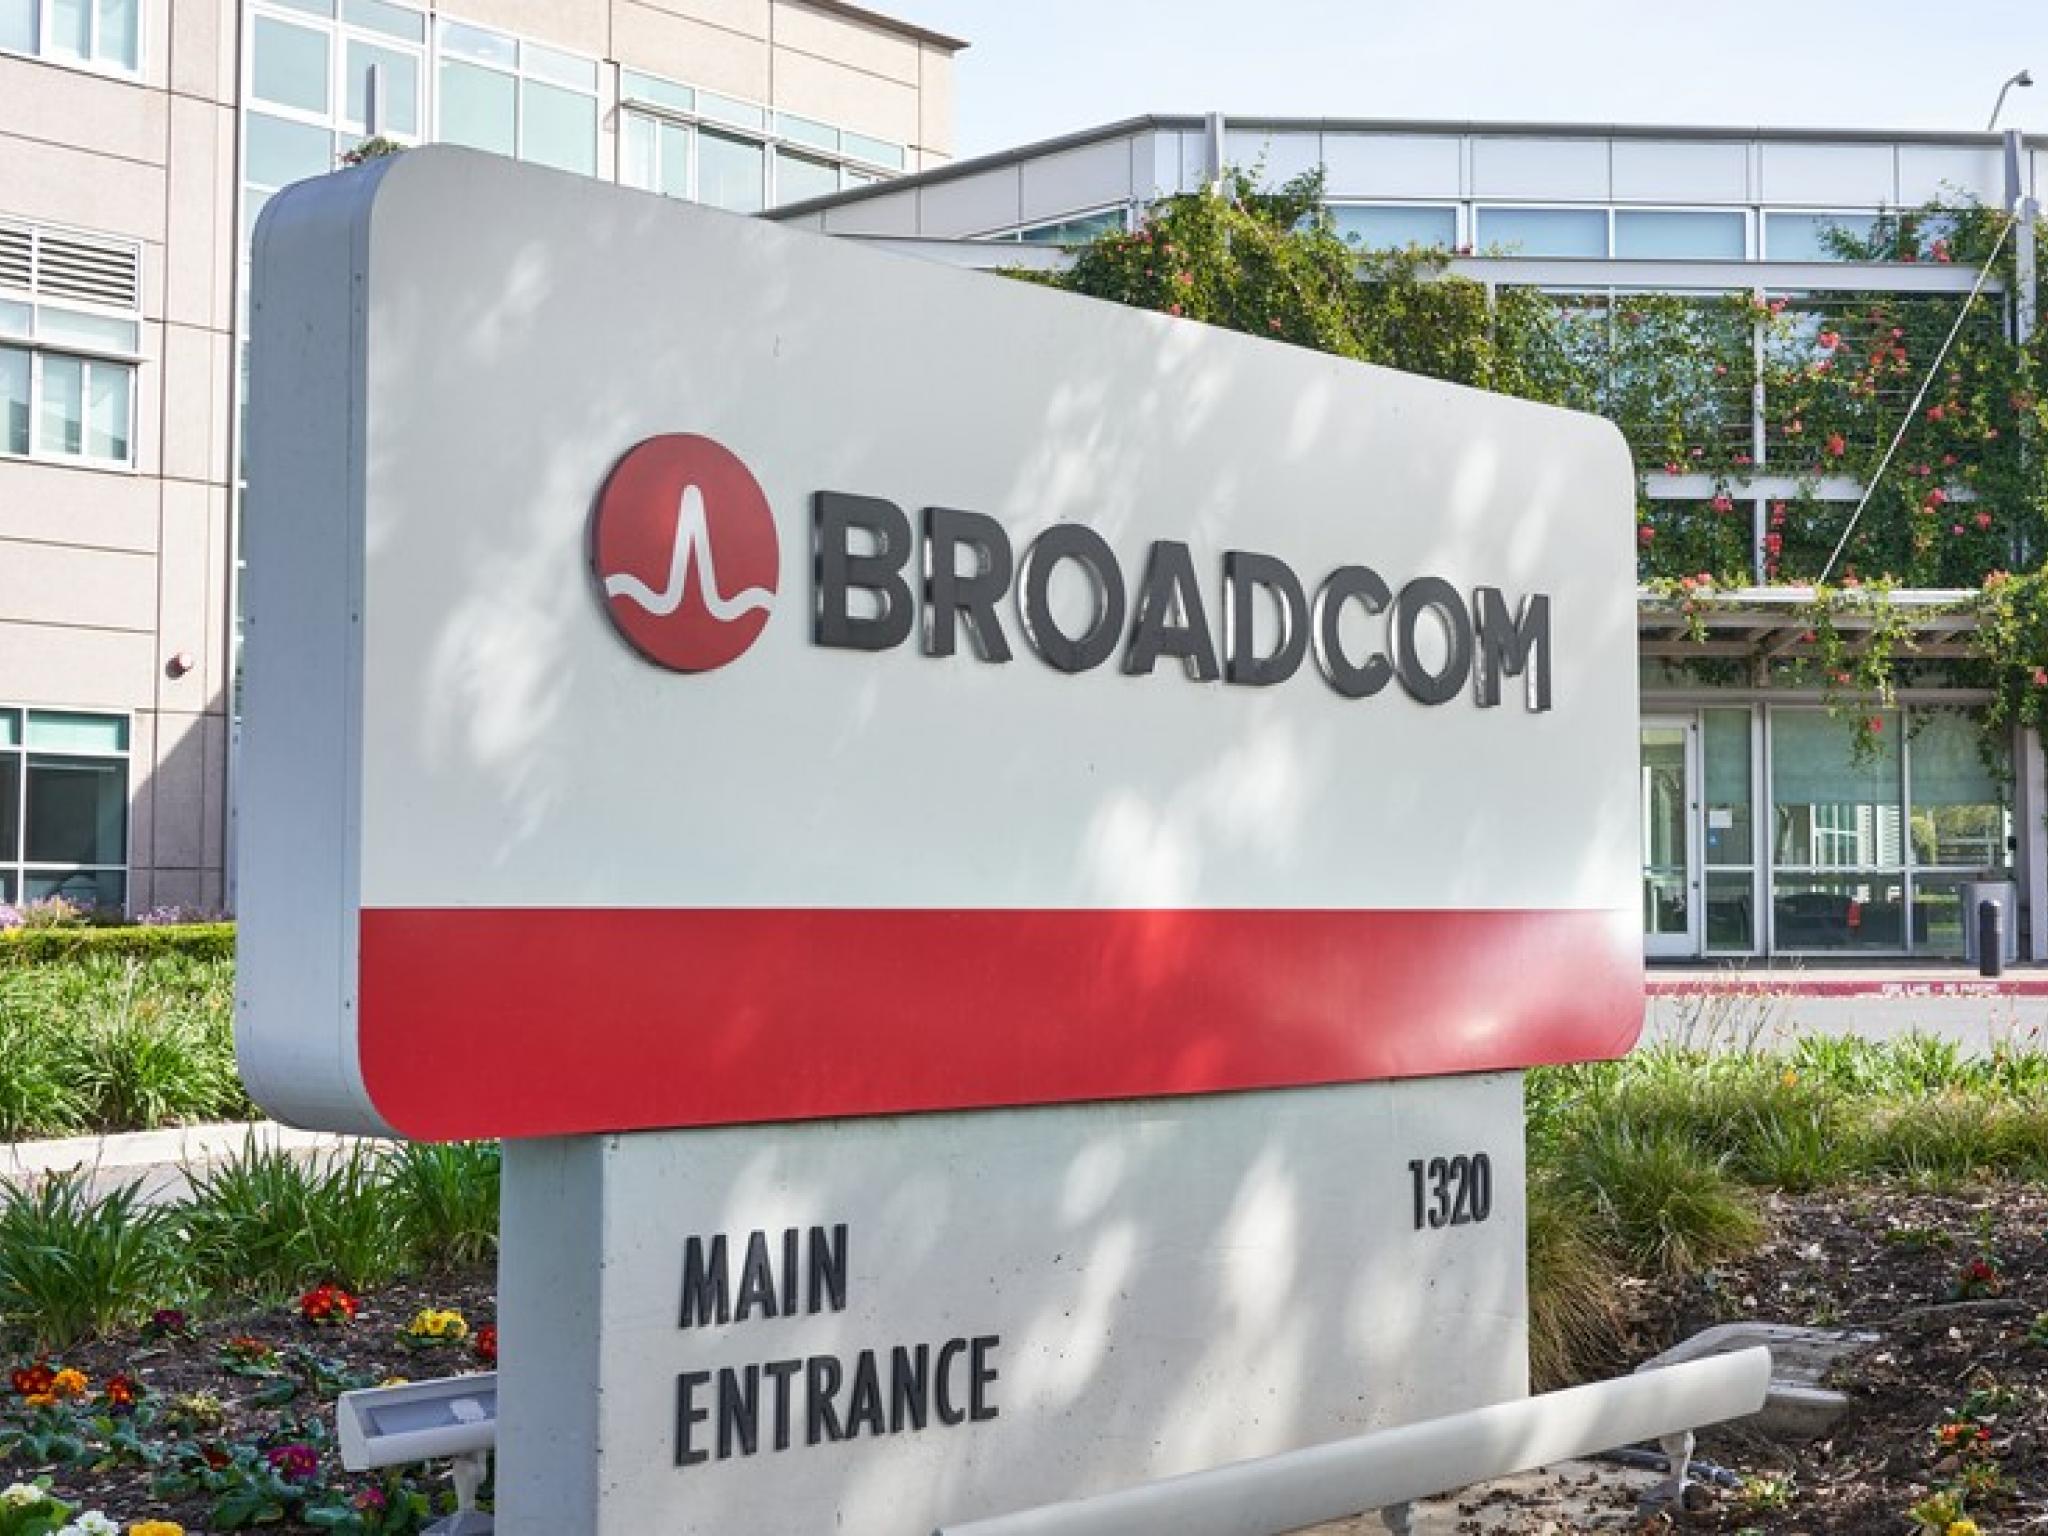  broadcom-gains-analyst-confidence-as-ai-innovations-and-strategic-acquisitions-set-to-propel-growth 